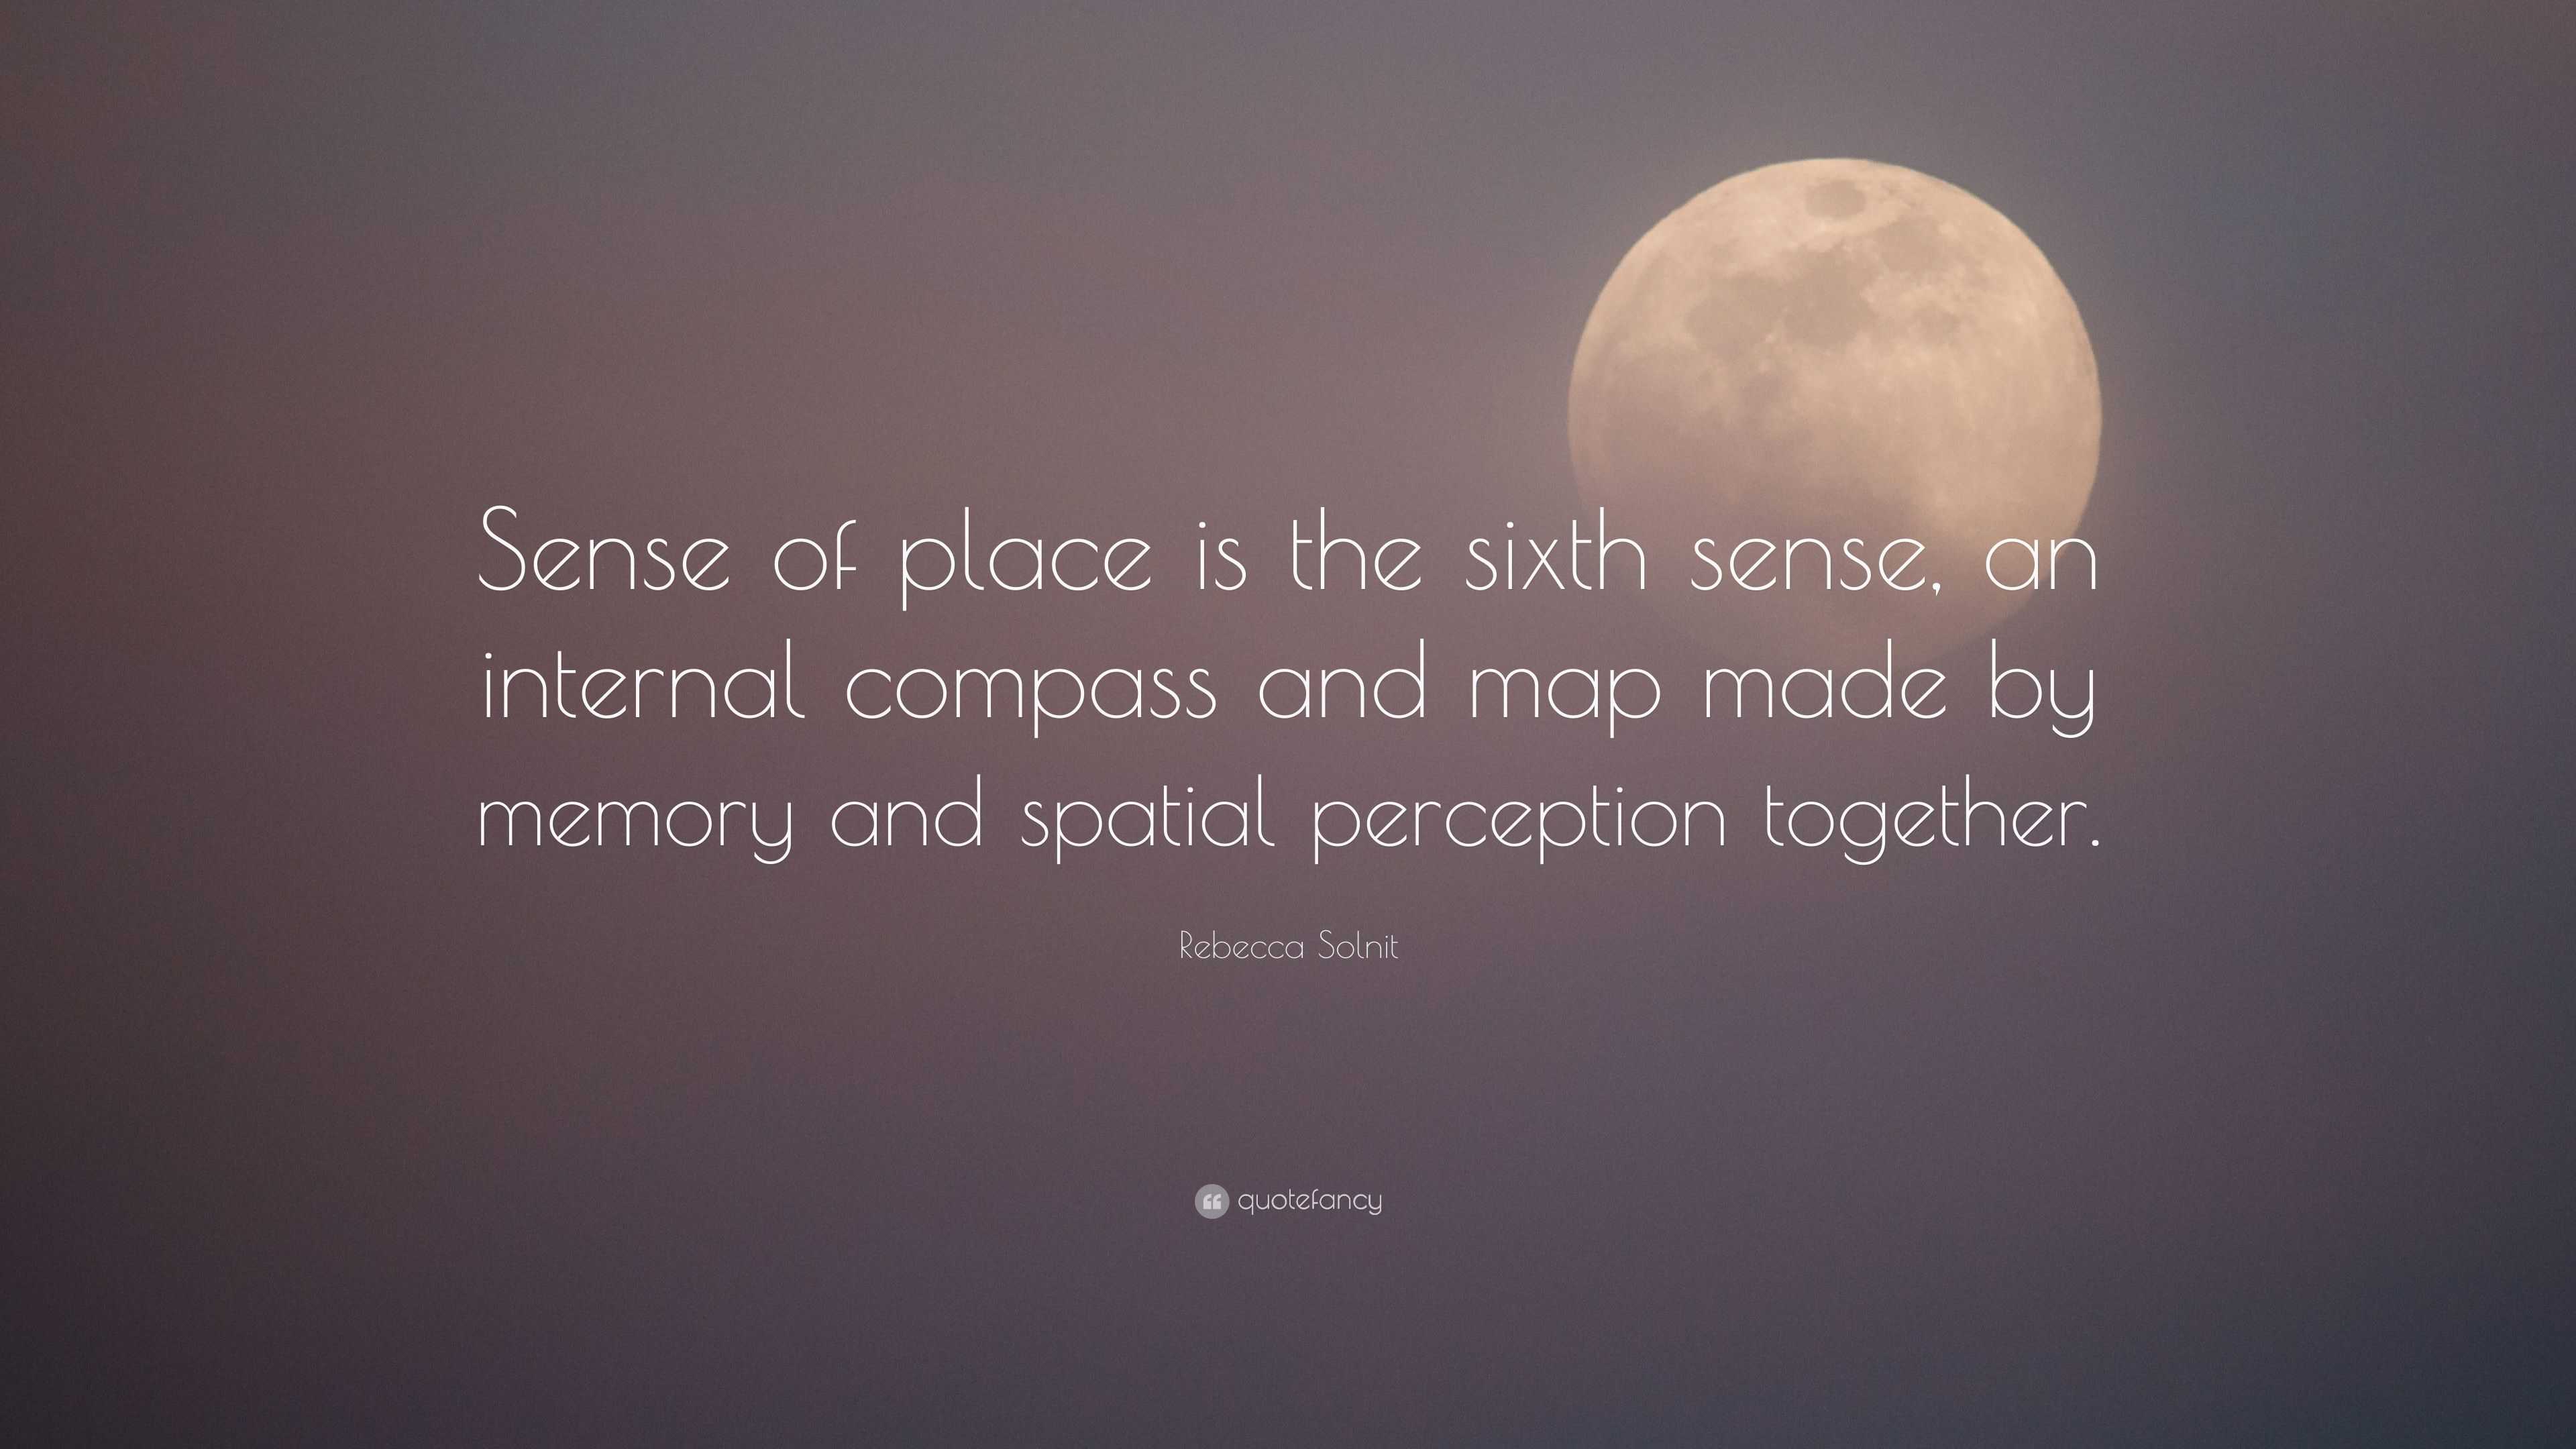 Rebecca Solnit Quote: “Sense of place is the sixth sense, an internal